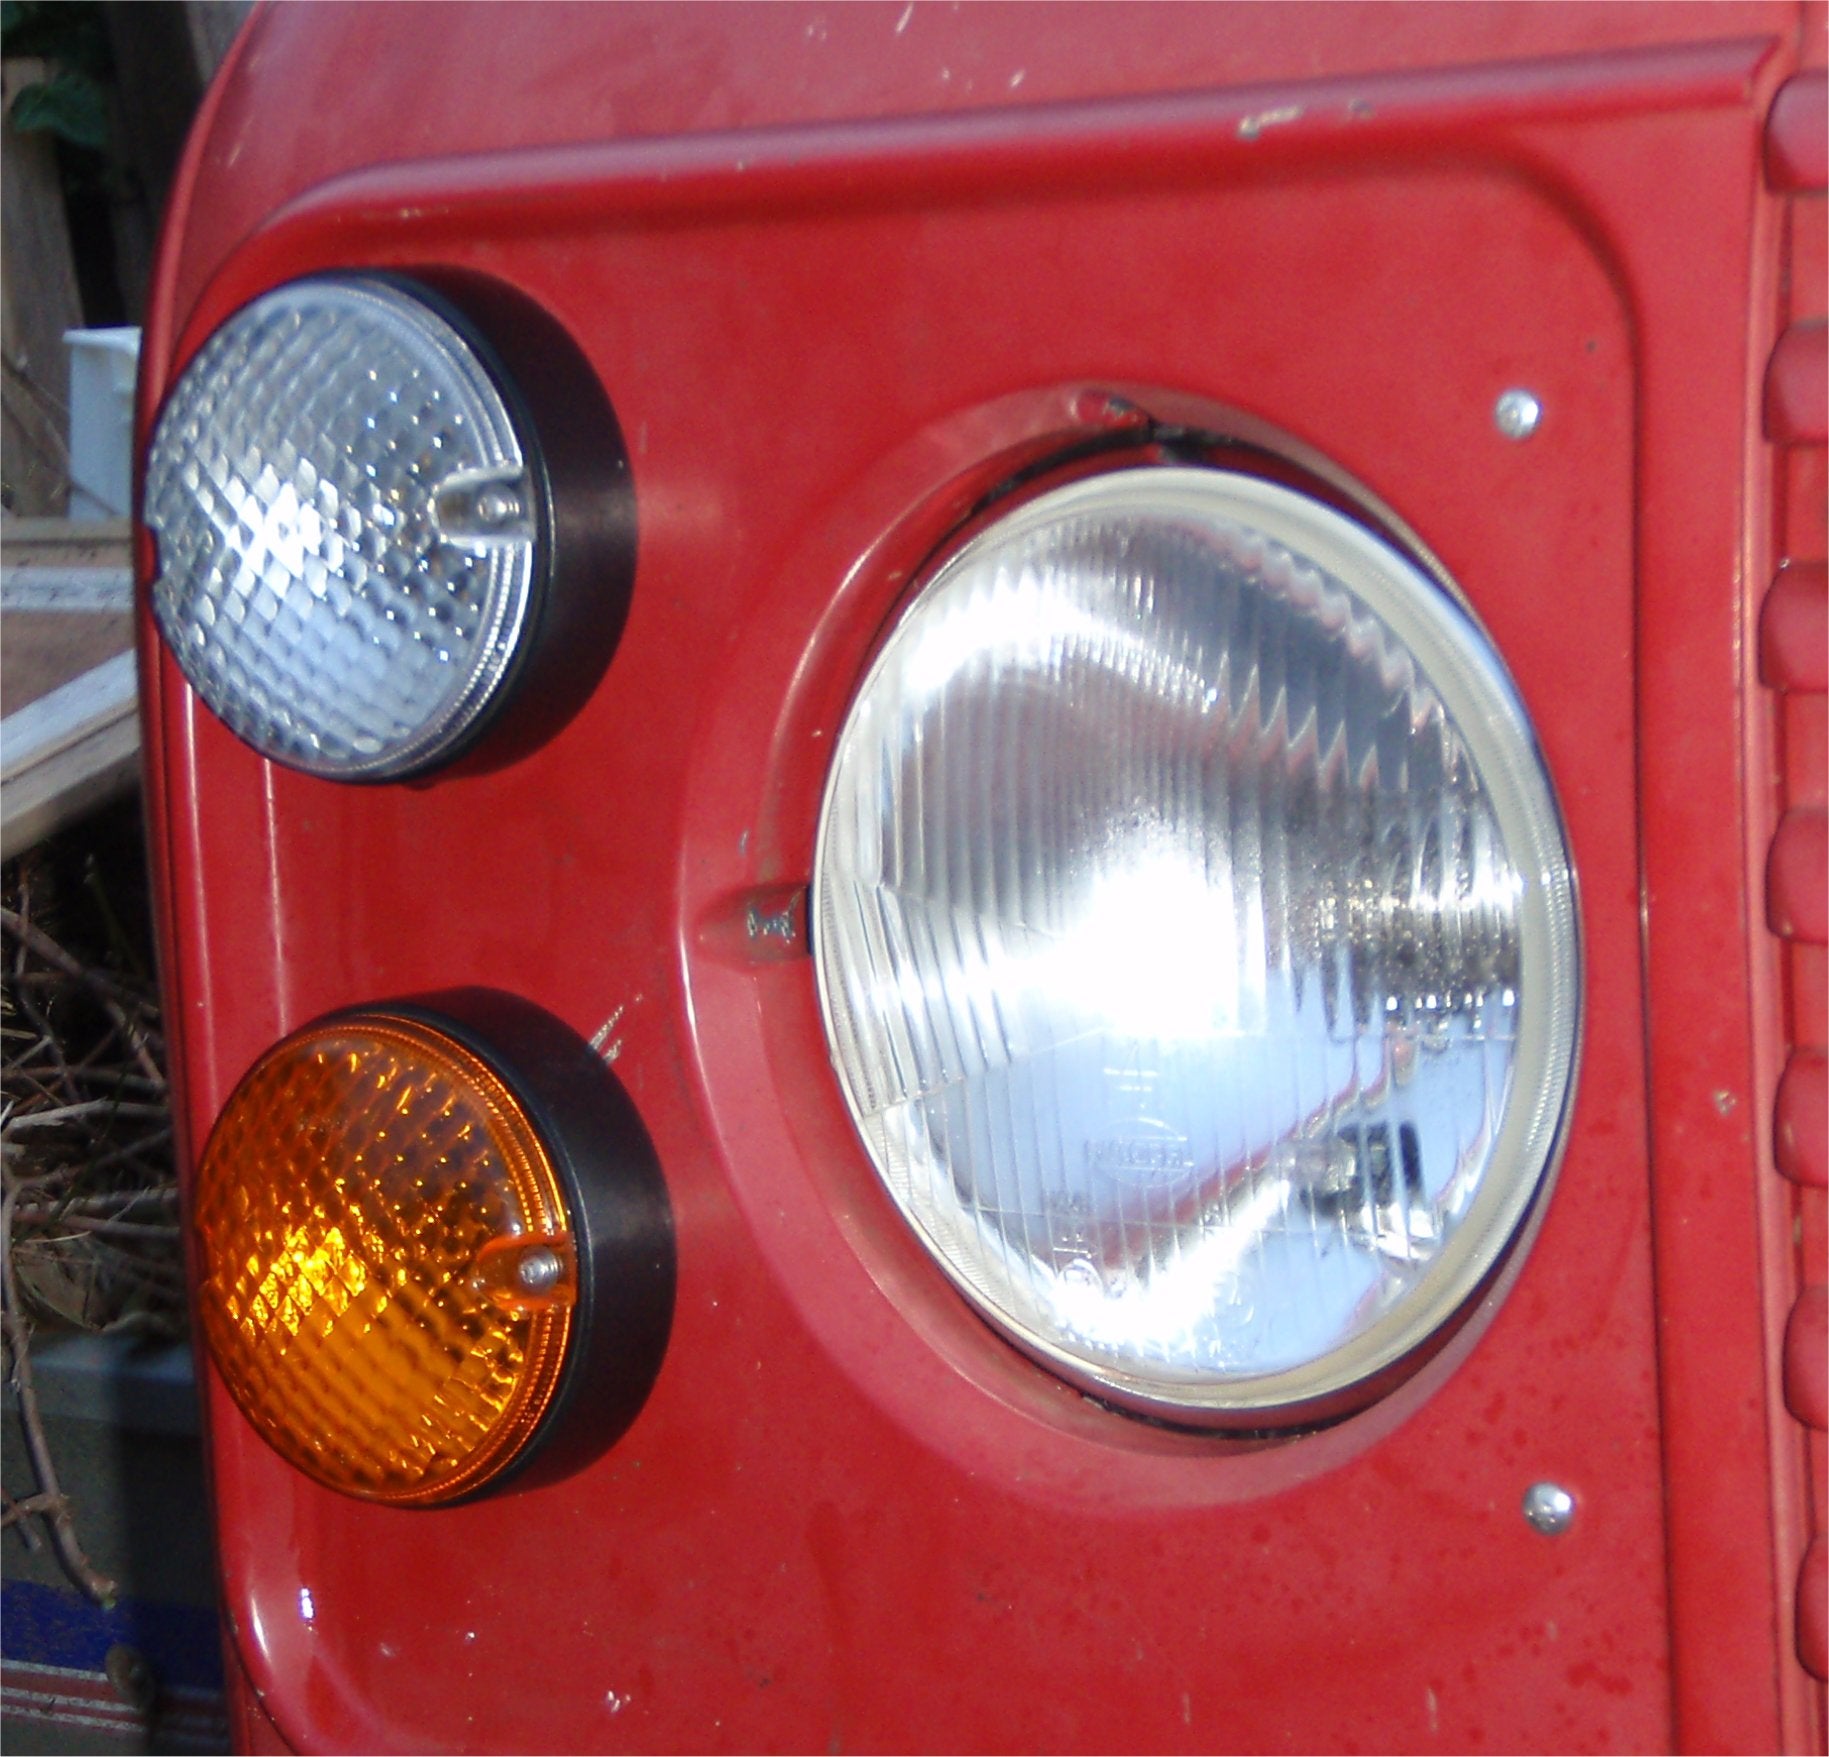 Upgrading the Exterior Lights on a Landrover Defender to NAS. (Part 2 of 3)